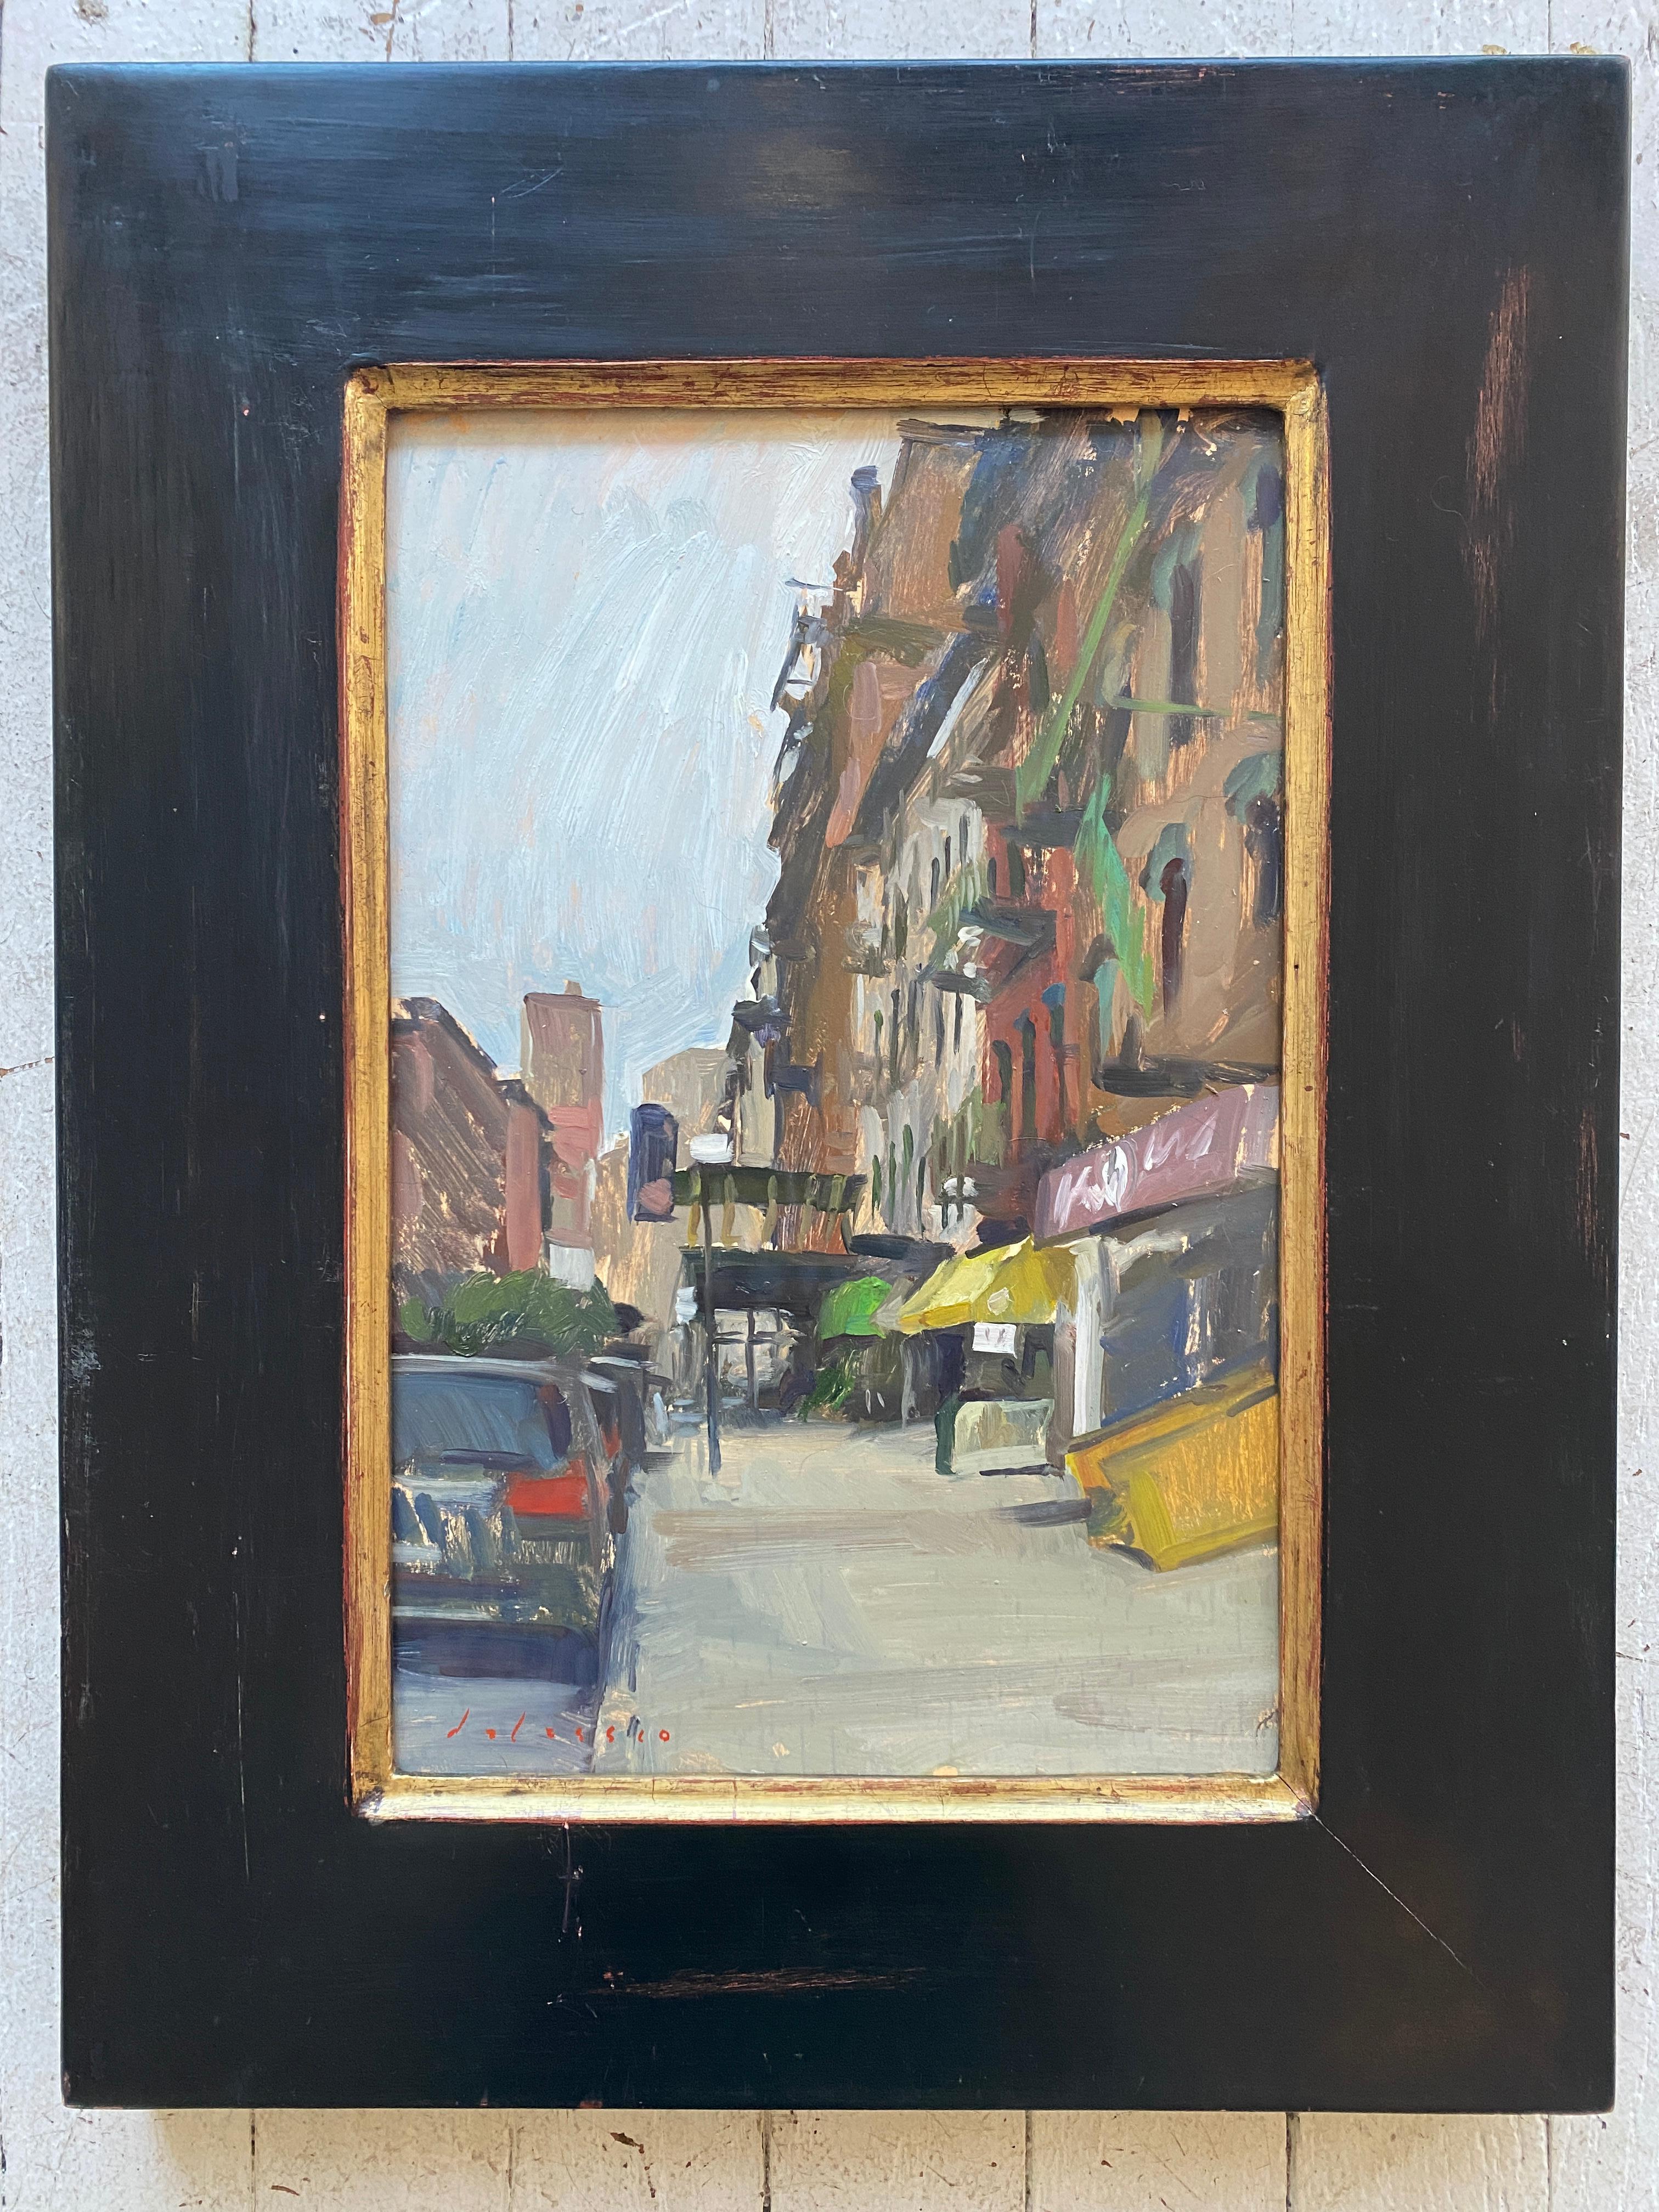 Centre Street, Chinatown, NY - Painting by Marc Dalessio